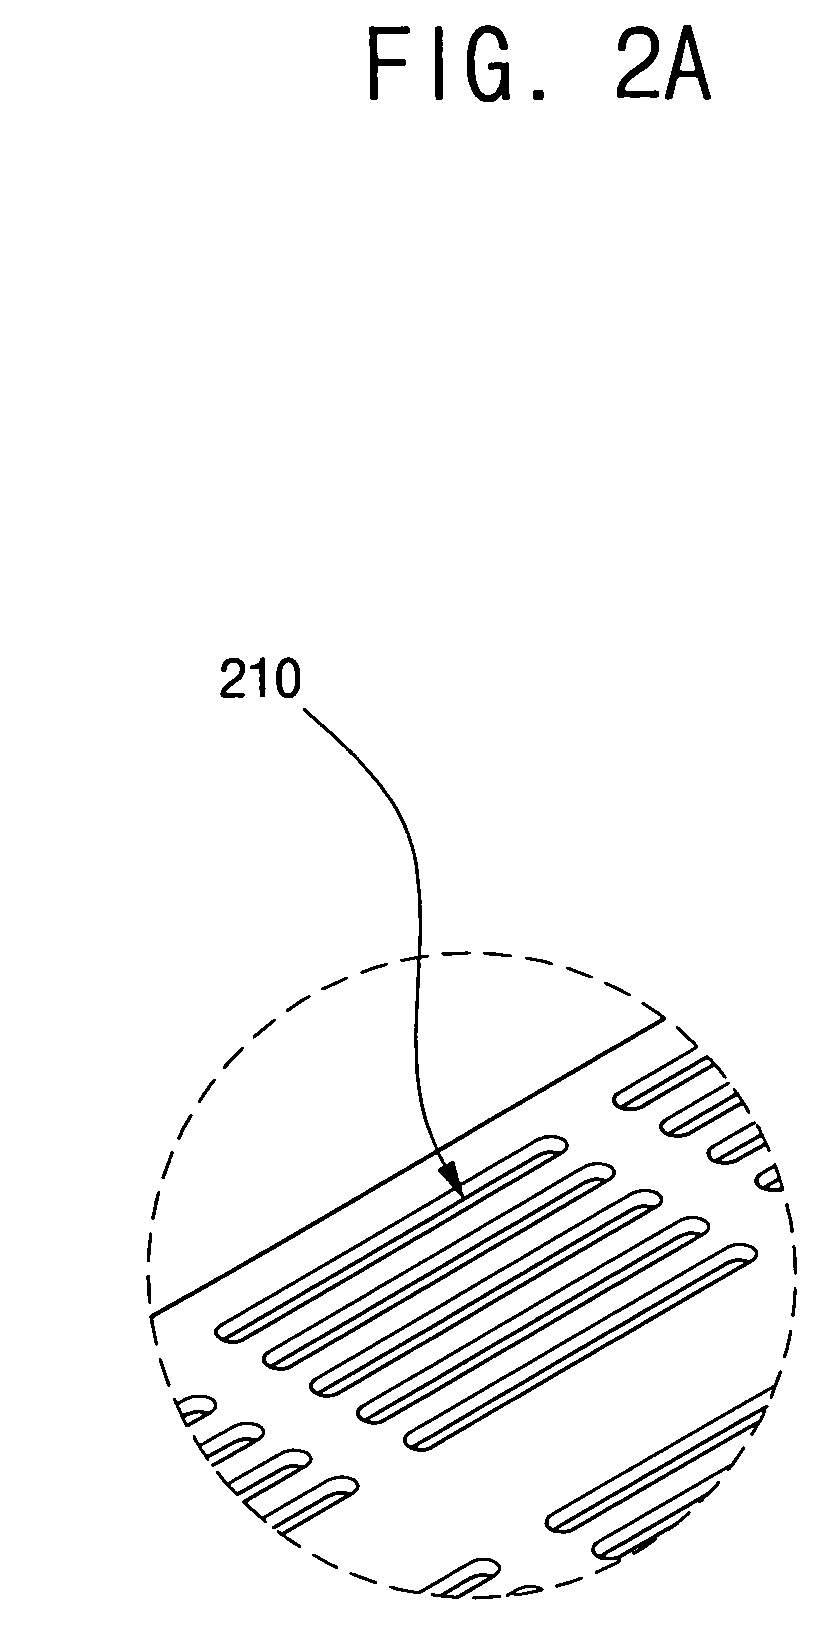 Mask assembly and method of fabricating the same